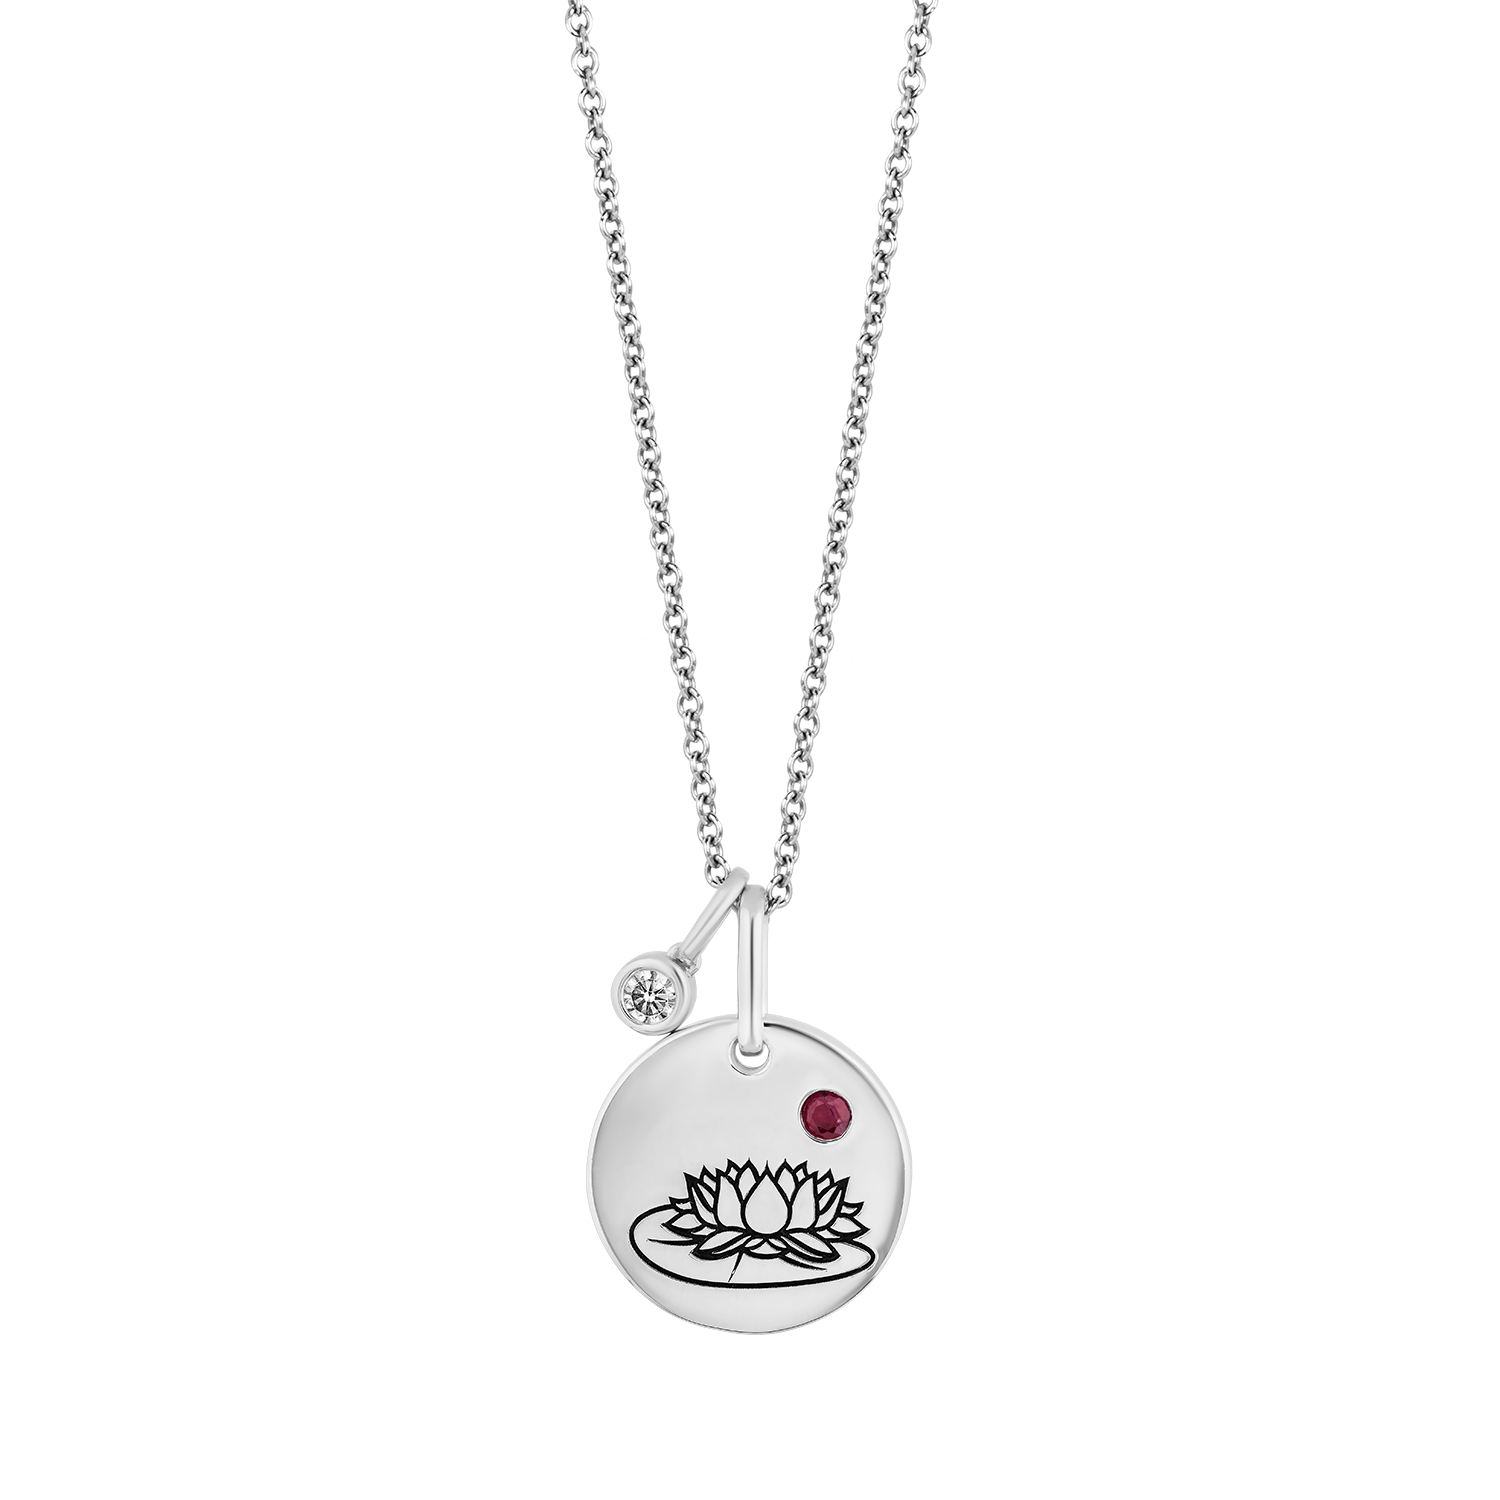 Blossom Birth Flower & Diamond Necklace in Sterling Silver